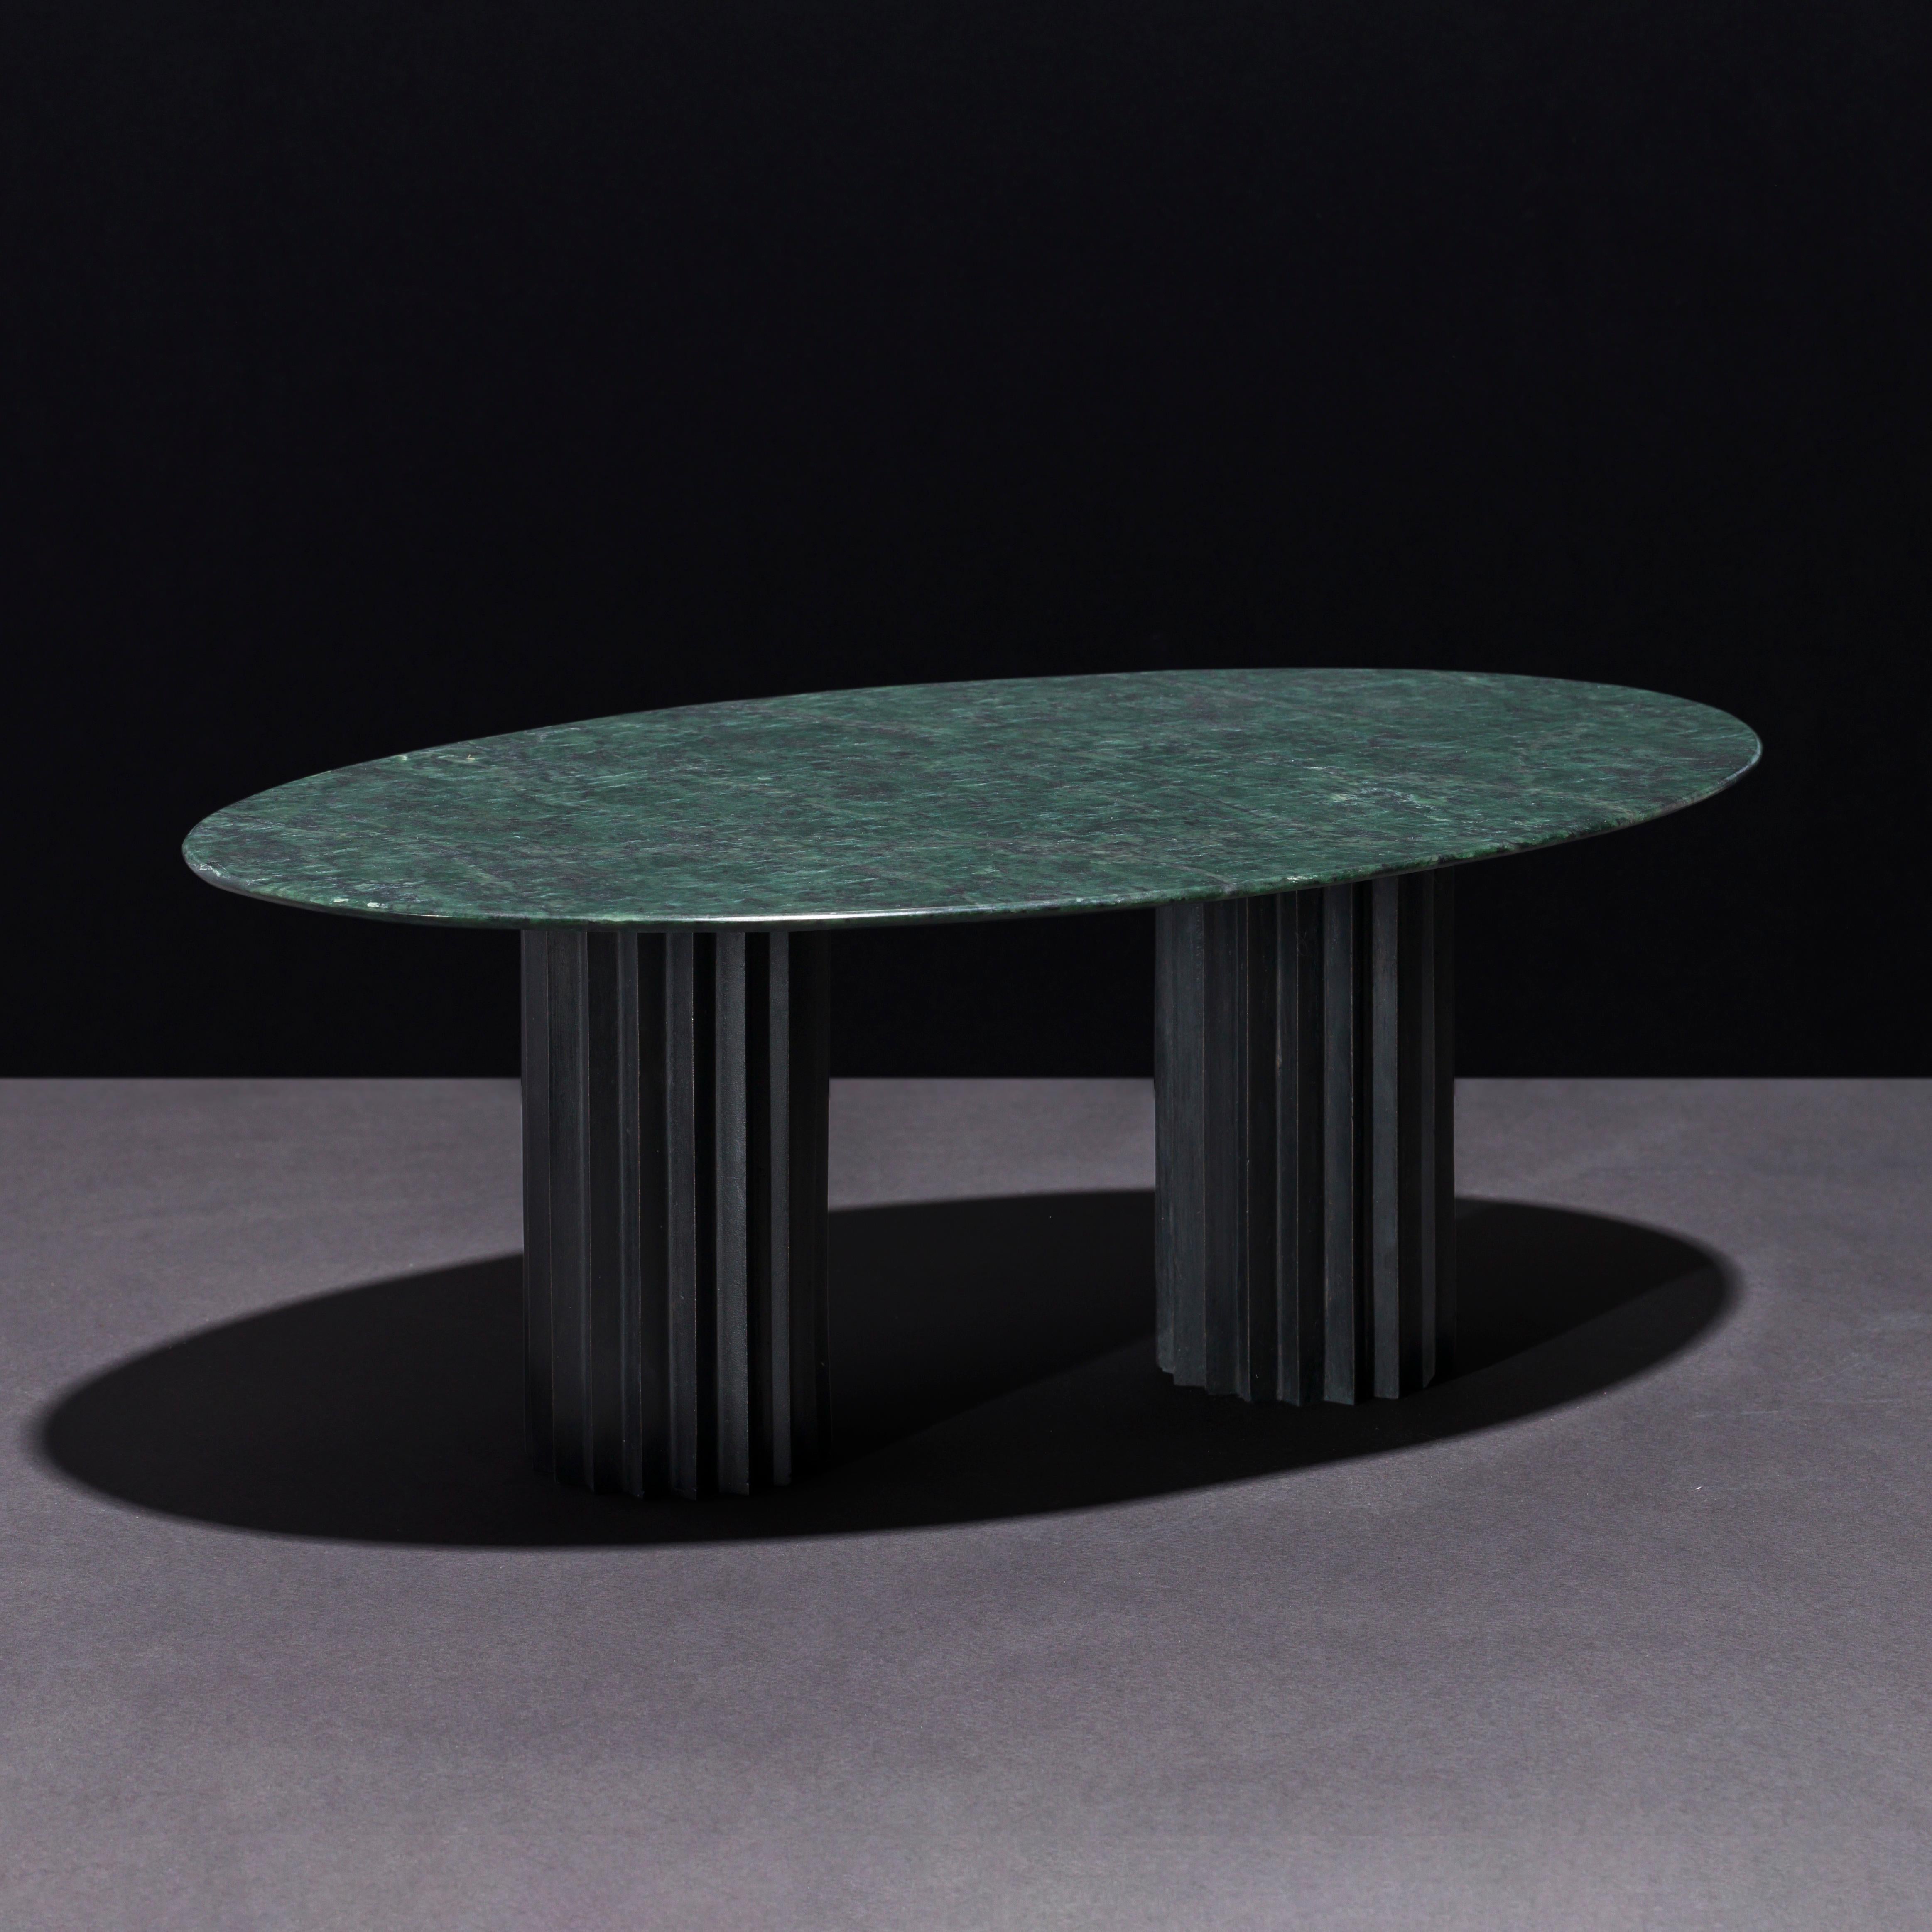 Doris Green Serpentino Marble Oval Dining Table by Fred and Juul
Dimensions: D 130 x W 220 x H 74 cm.
Materials: Black patinated bronze and Green Serpentino marble.

Available in round, oval and rectangular shapes. Also available in different